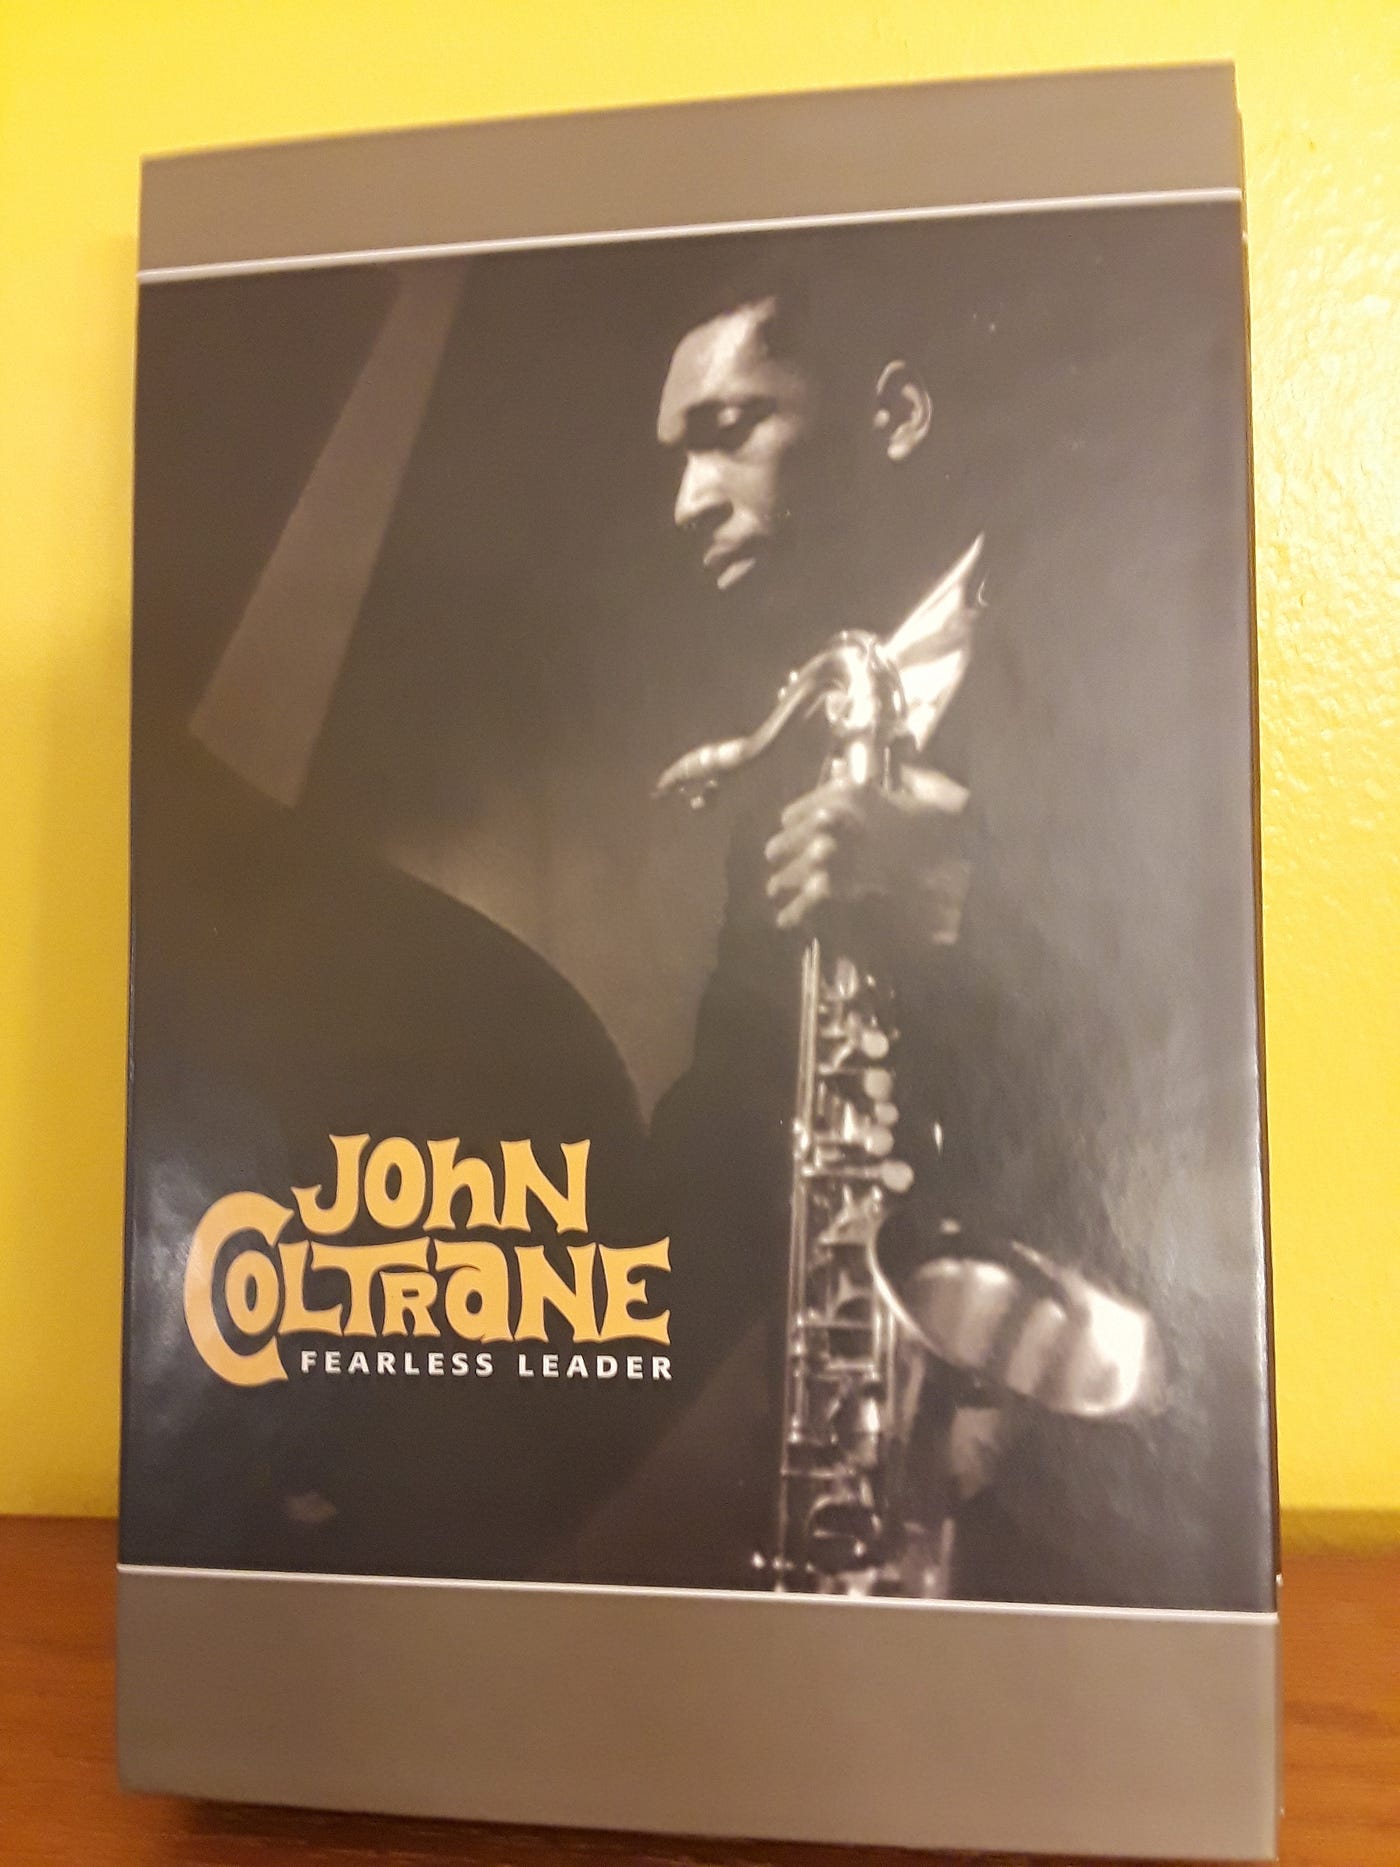 The world doesn't need any more John Coltrane reissues. There, I